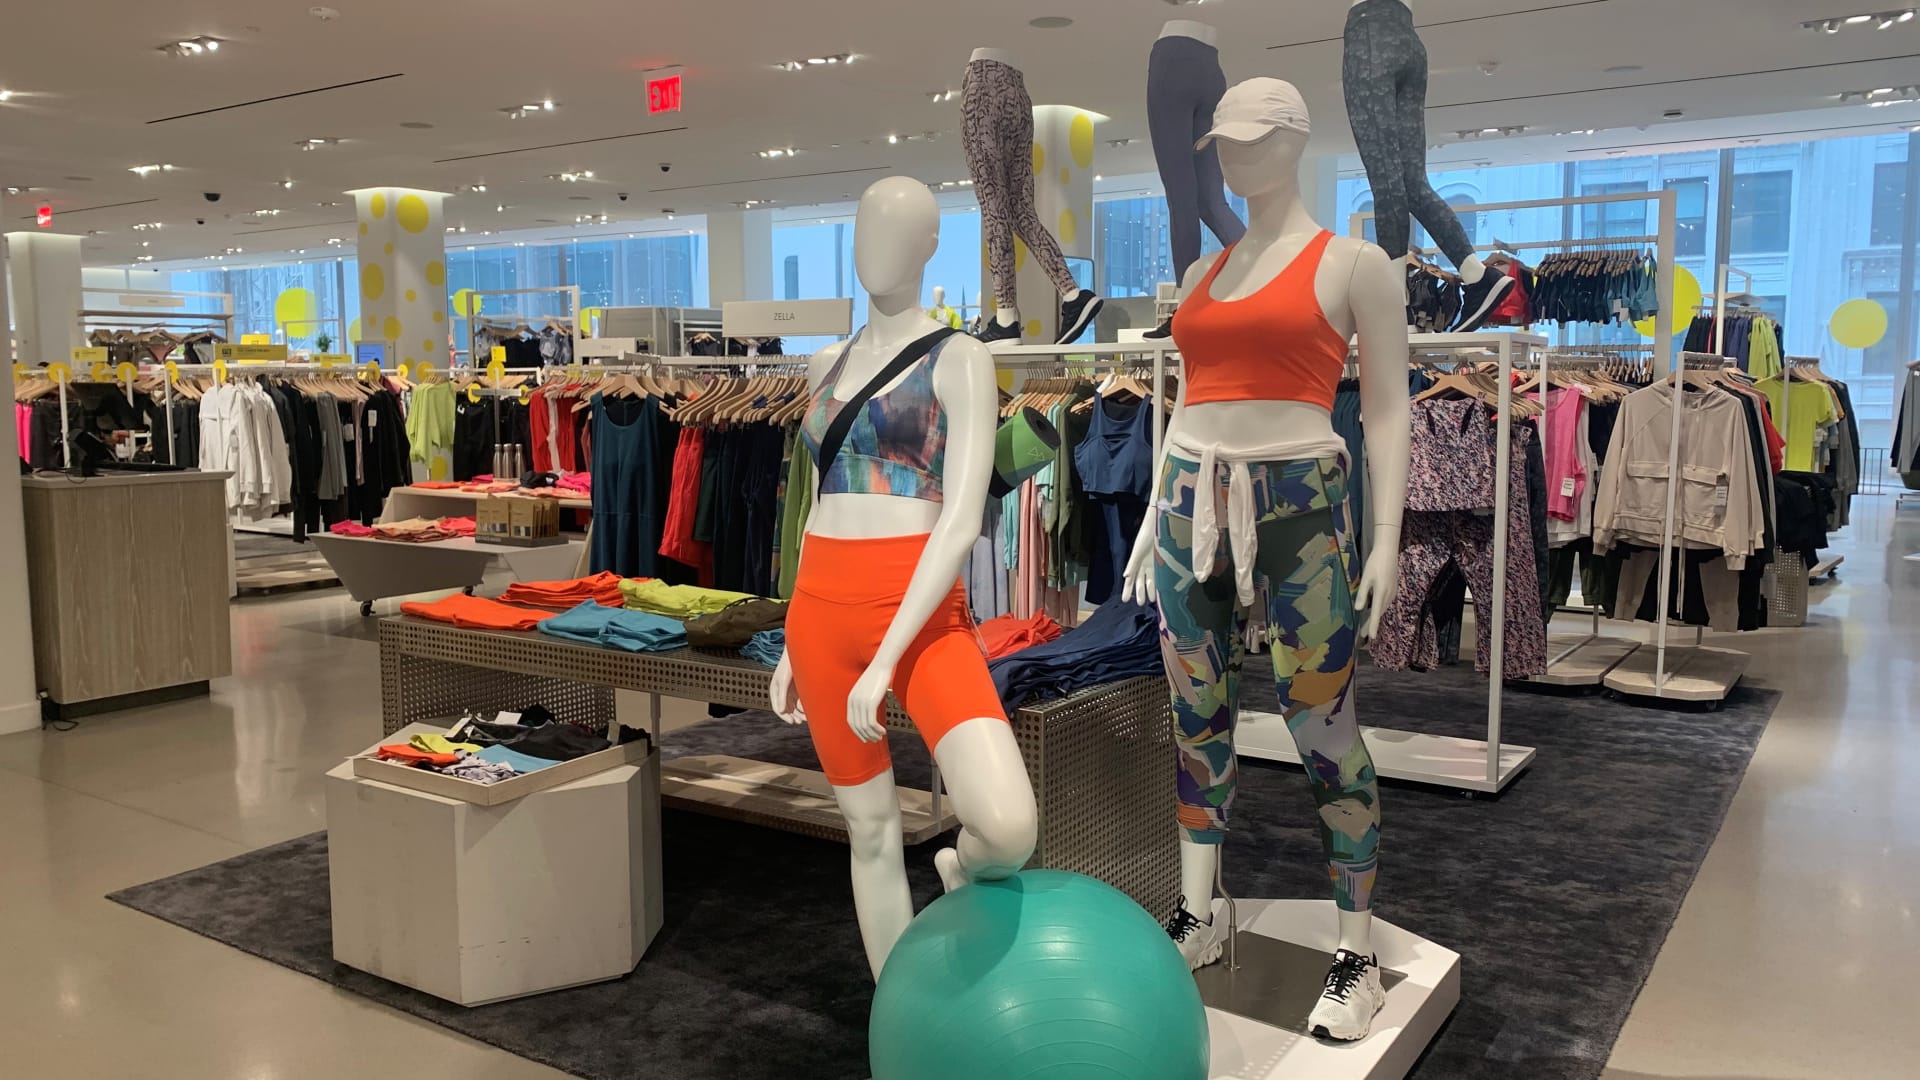 Active wear is on display during Nordstrom's annual Anniversary Sale event, at the company's flagship store in New York City.